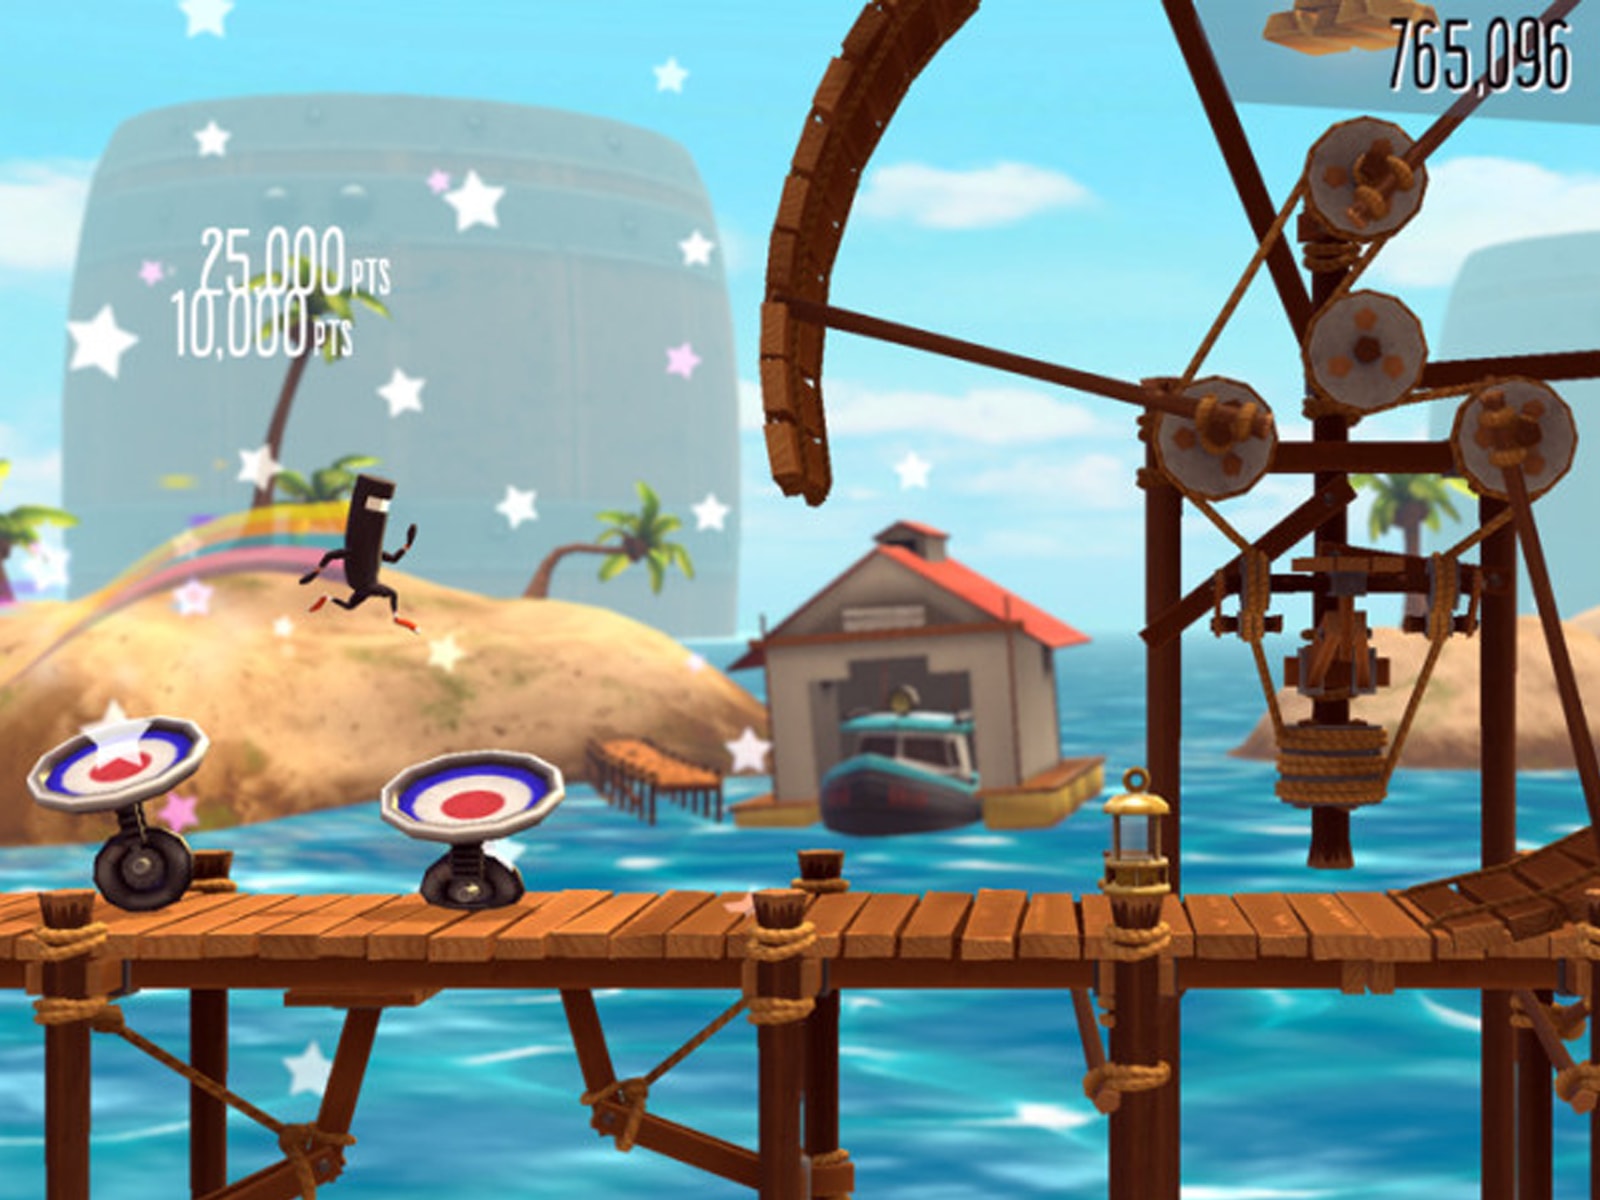 Screenshot of the Aquatic Symphonic level from bit.trip runner 2, with a character running on a wooden platform above water